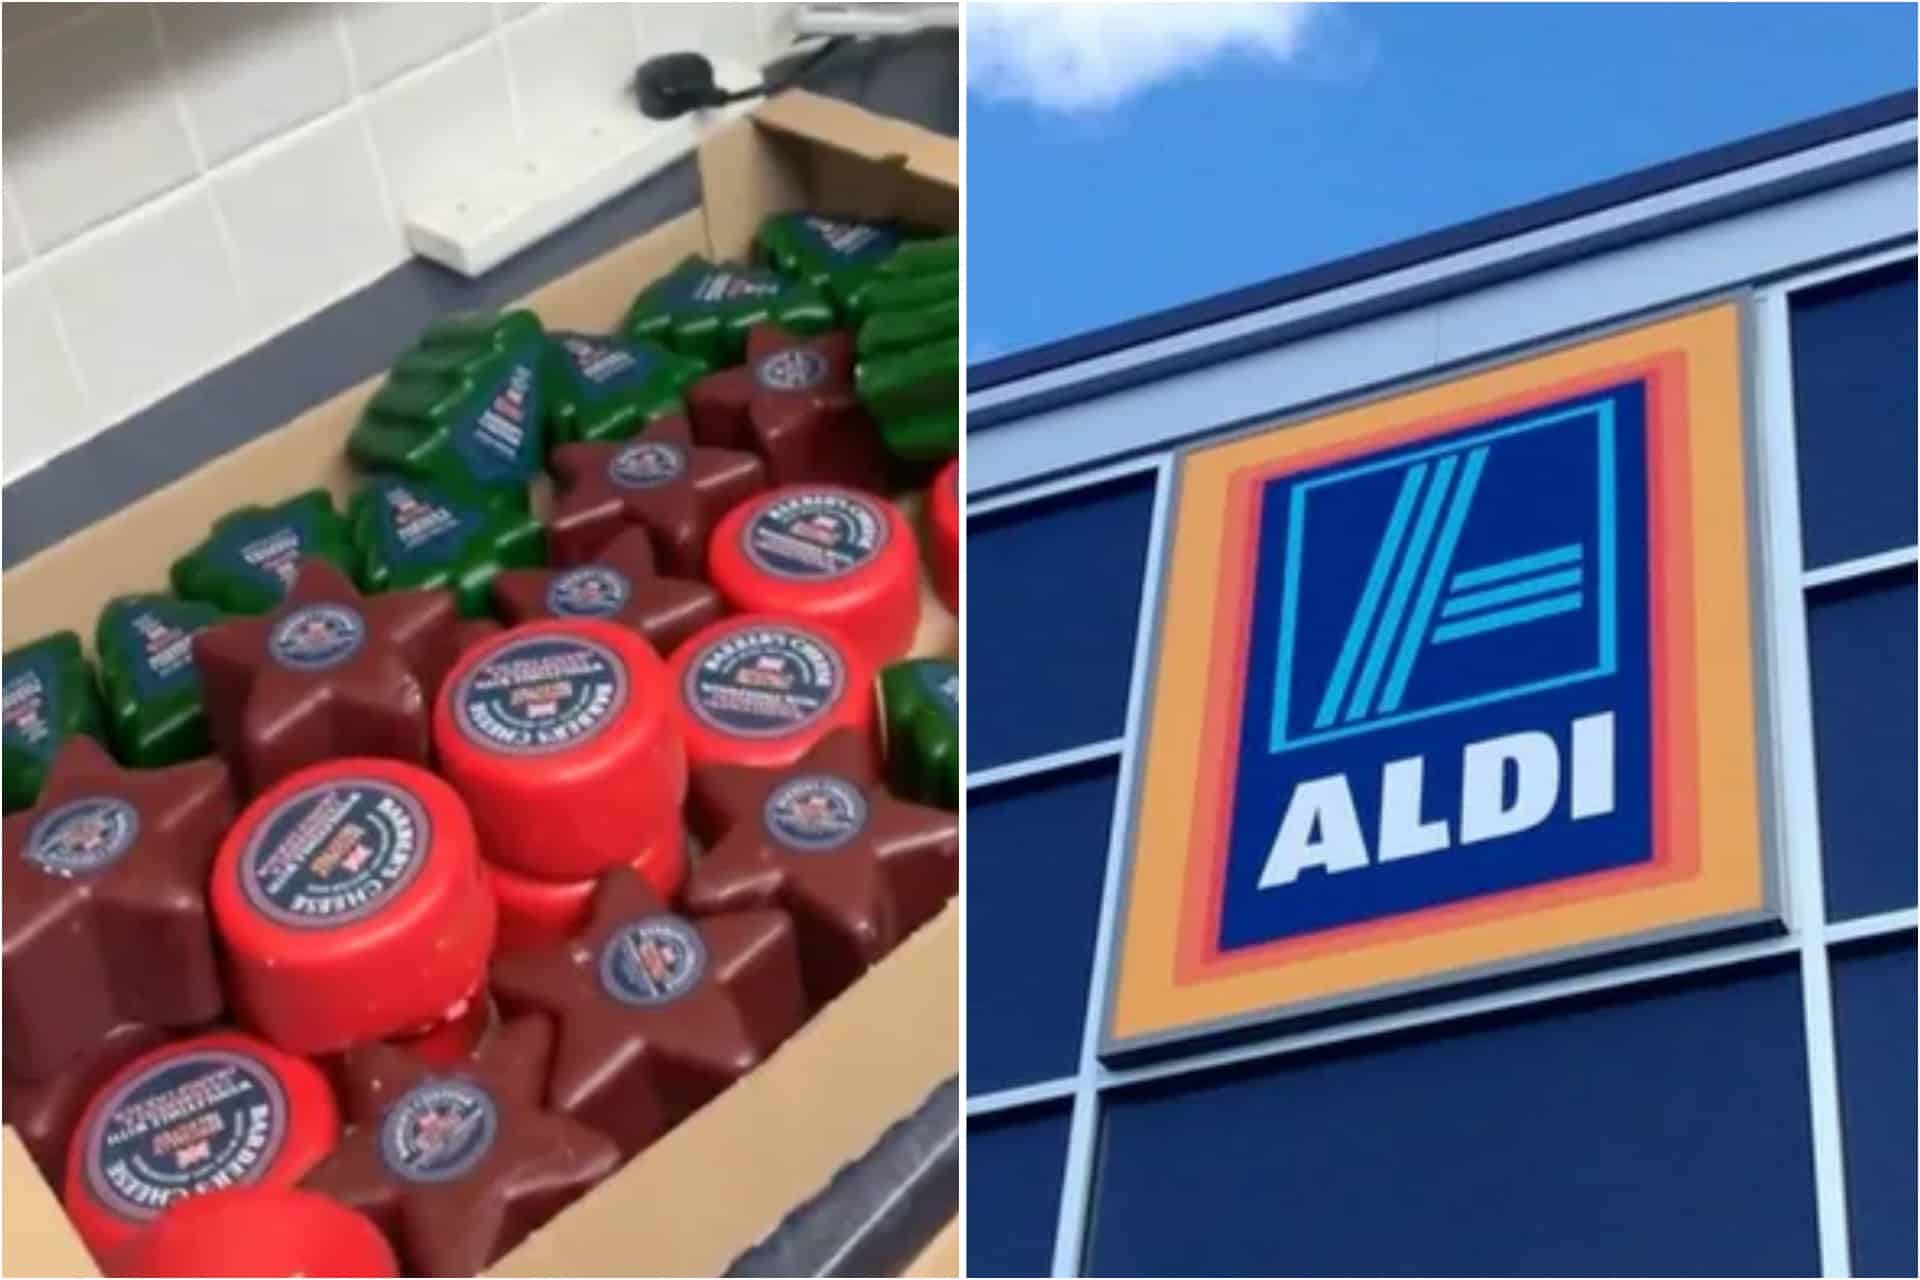 People run to buy Aldi’s £3.30 ‘Surprise Bag’ after man gets enough cheese to feed a whole city